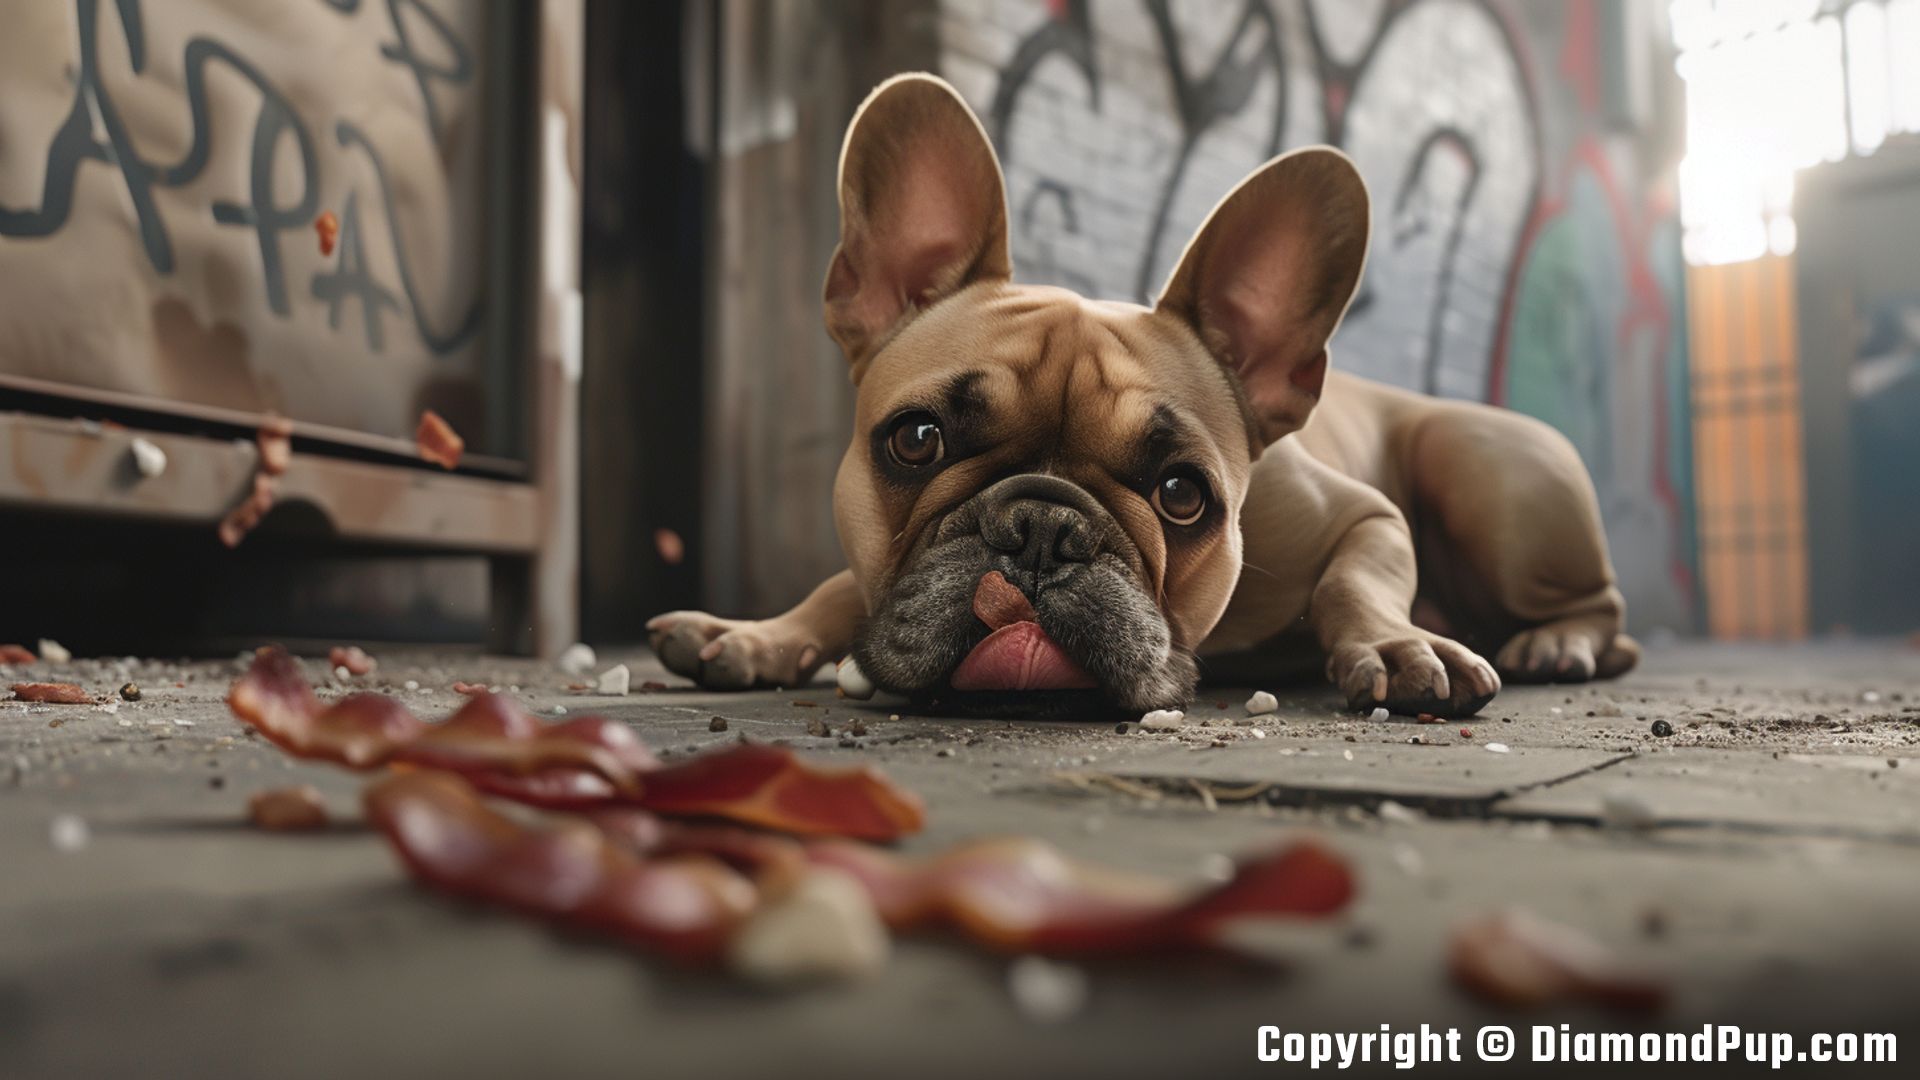 Image of a Cute French Bulldog Eating Bacon